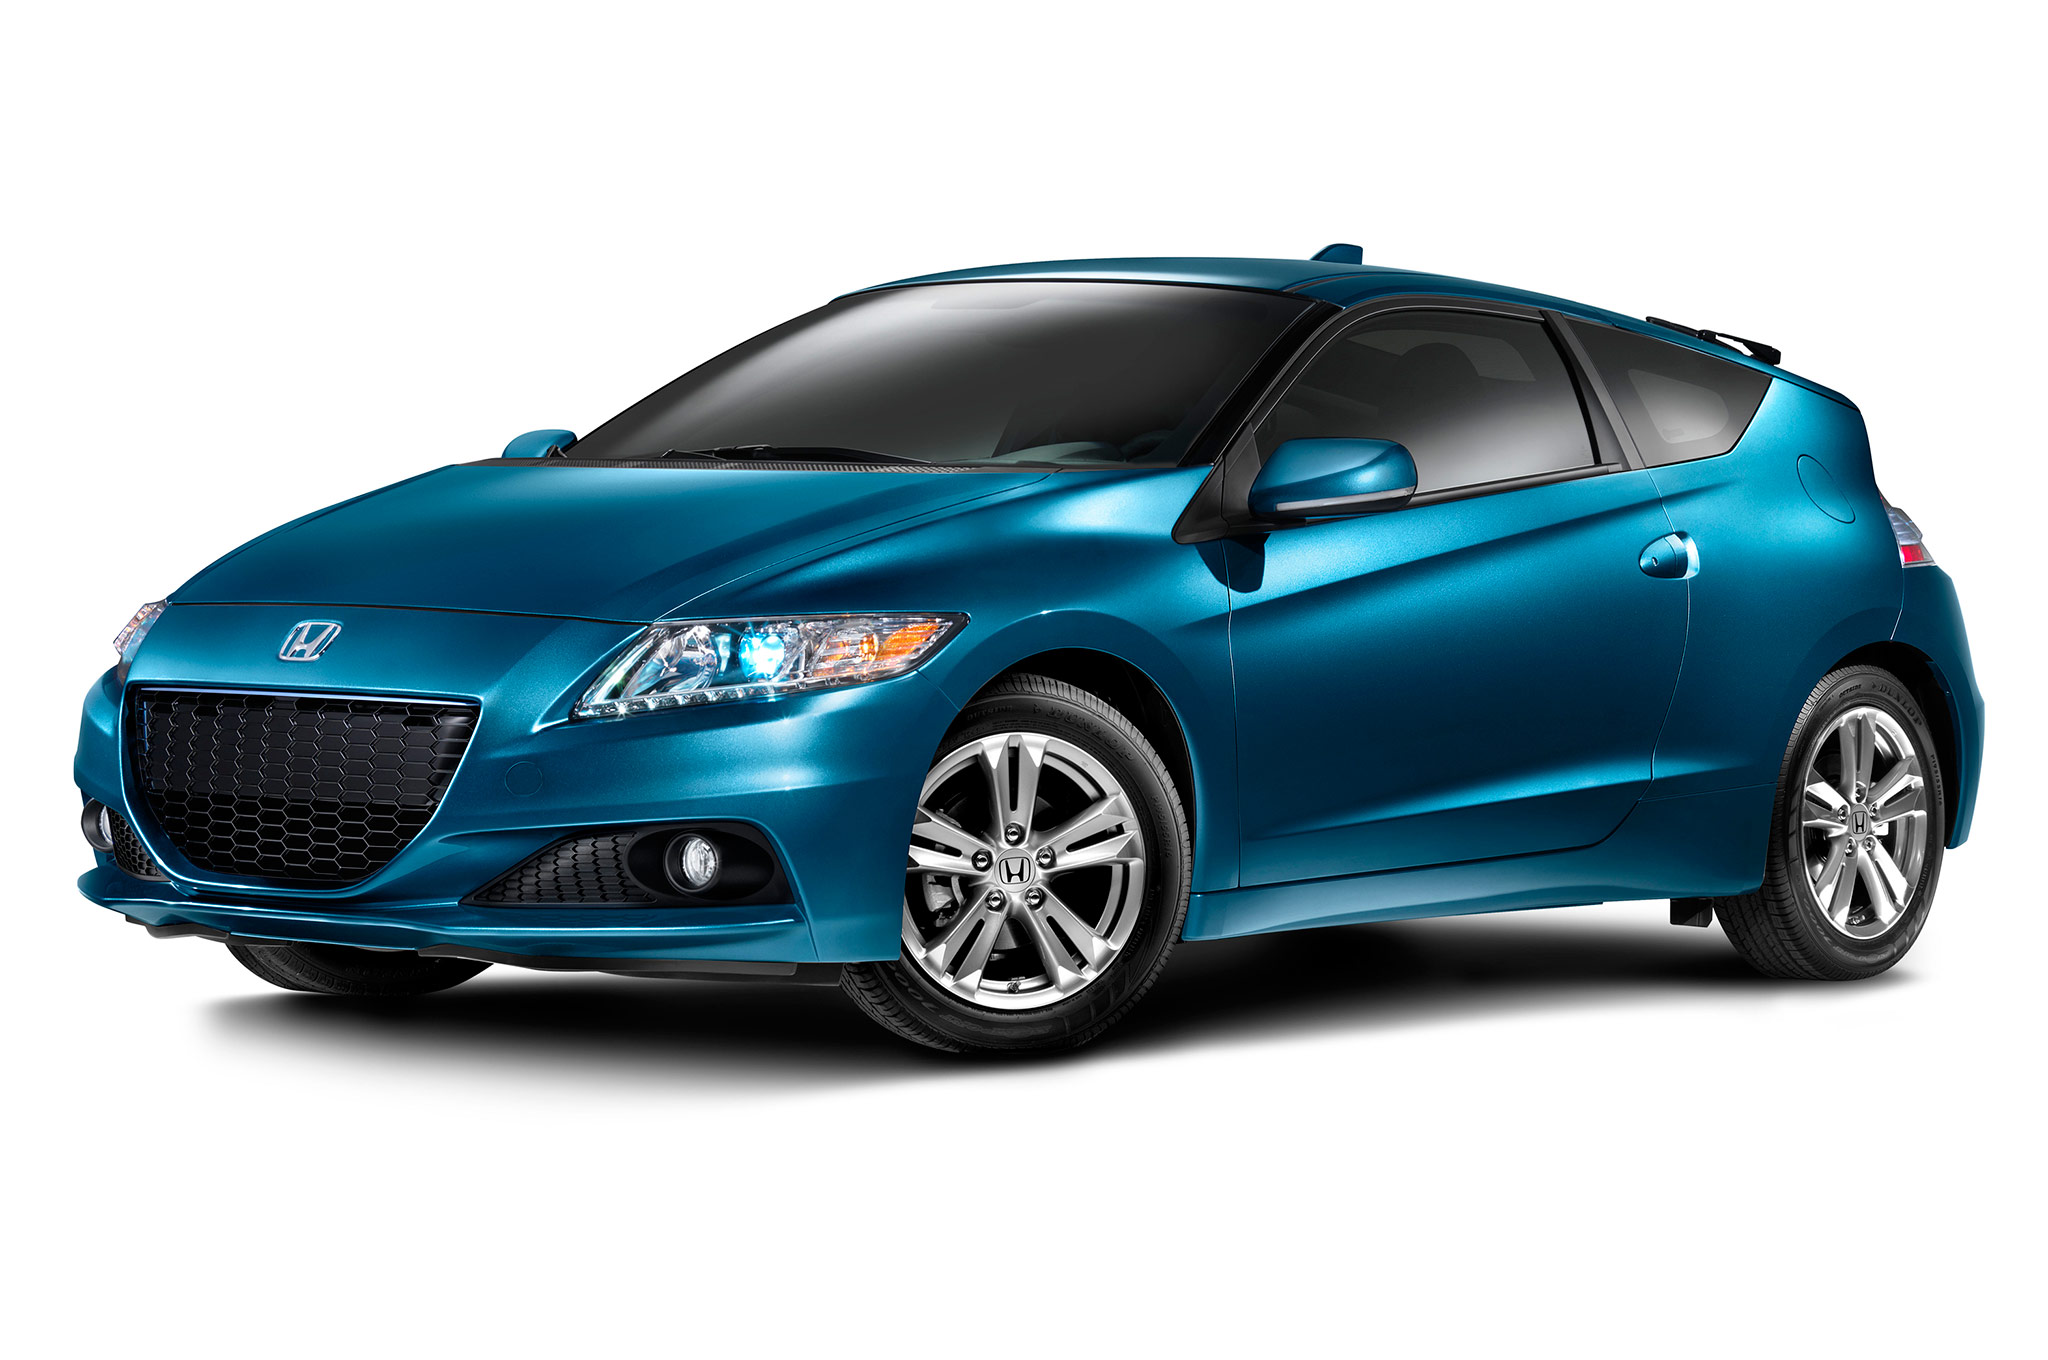 2015 Honda CR-Z Detailed, Price Hikes $150 Over the 2014 Model Year